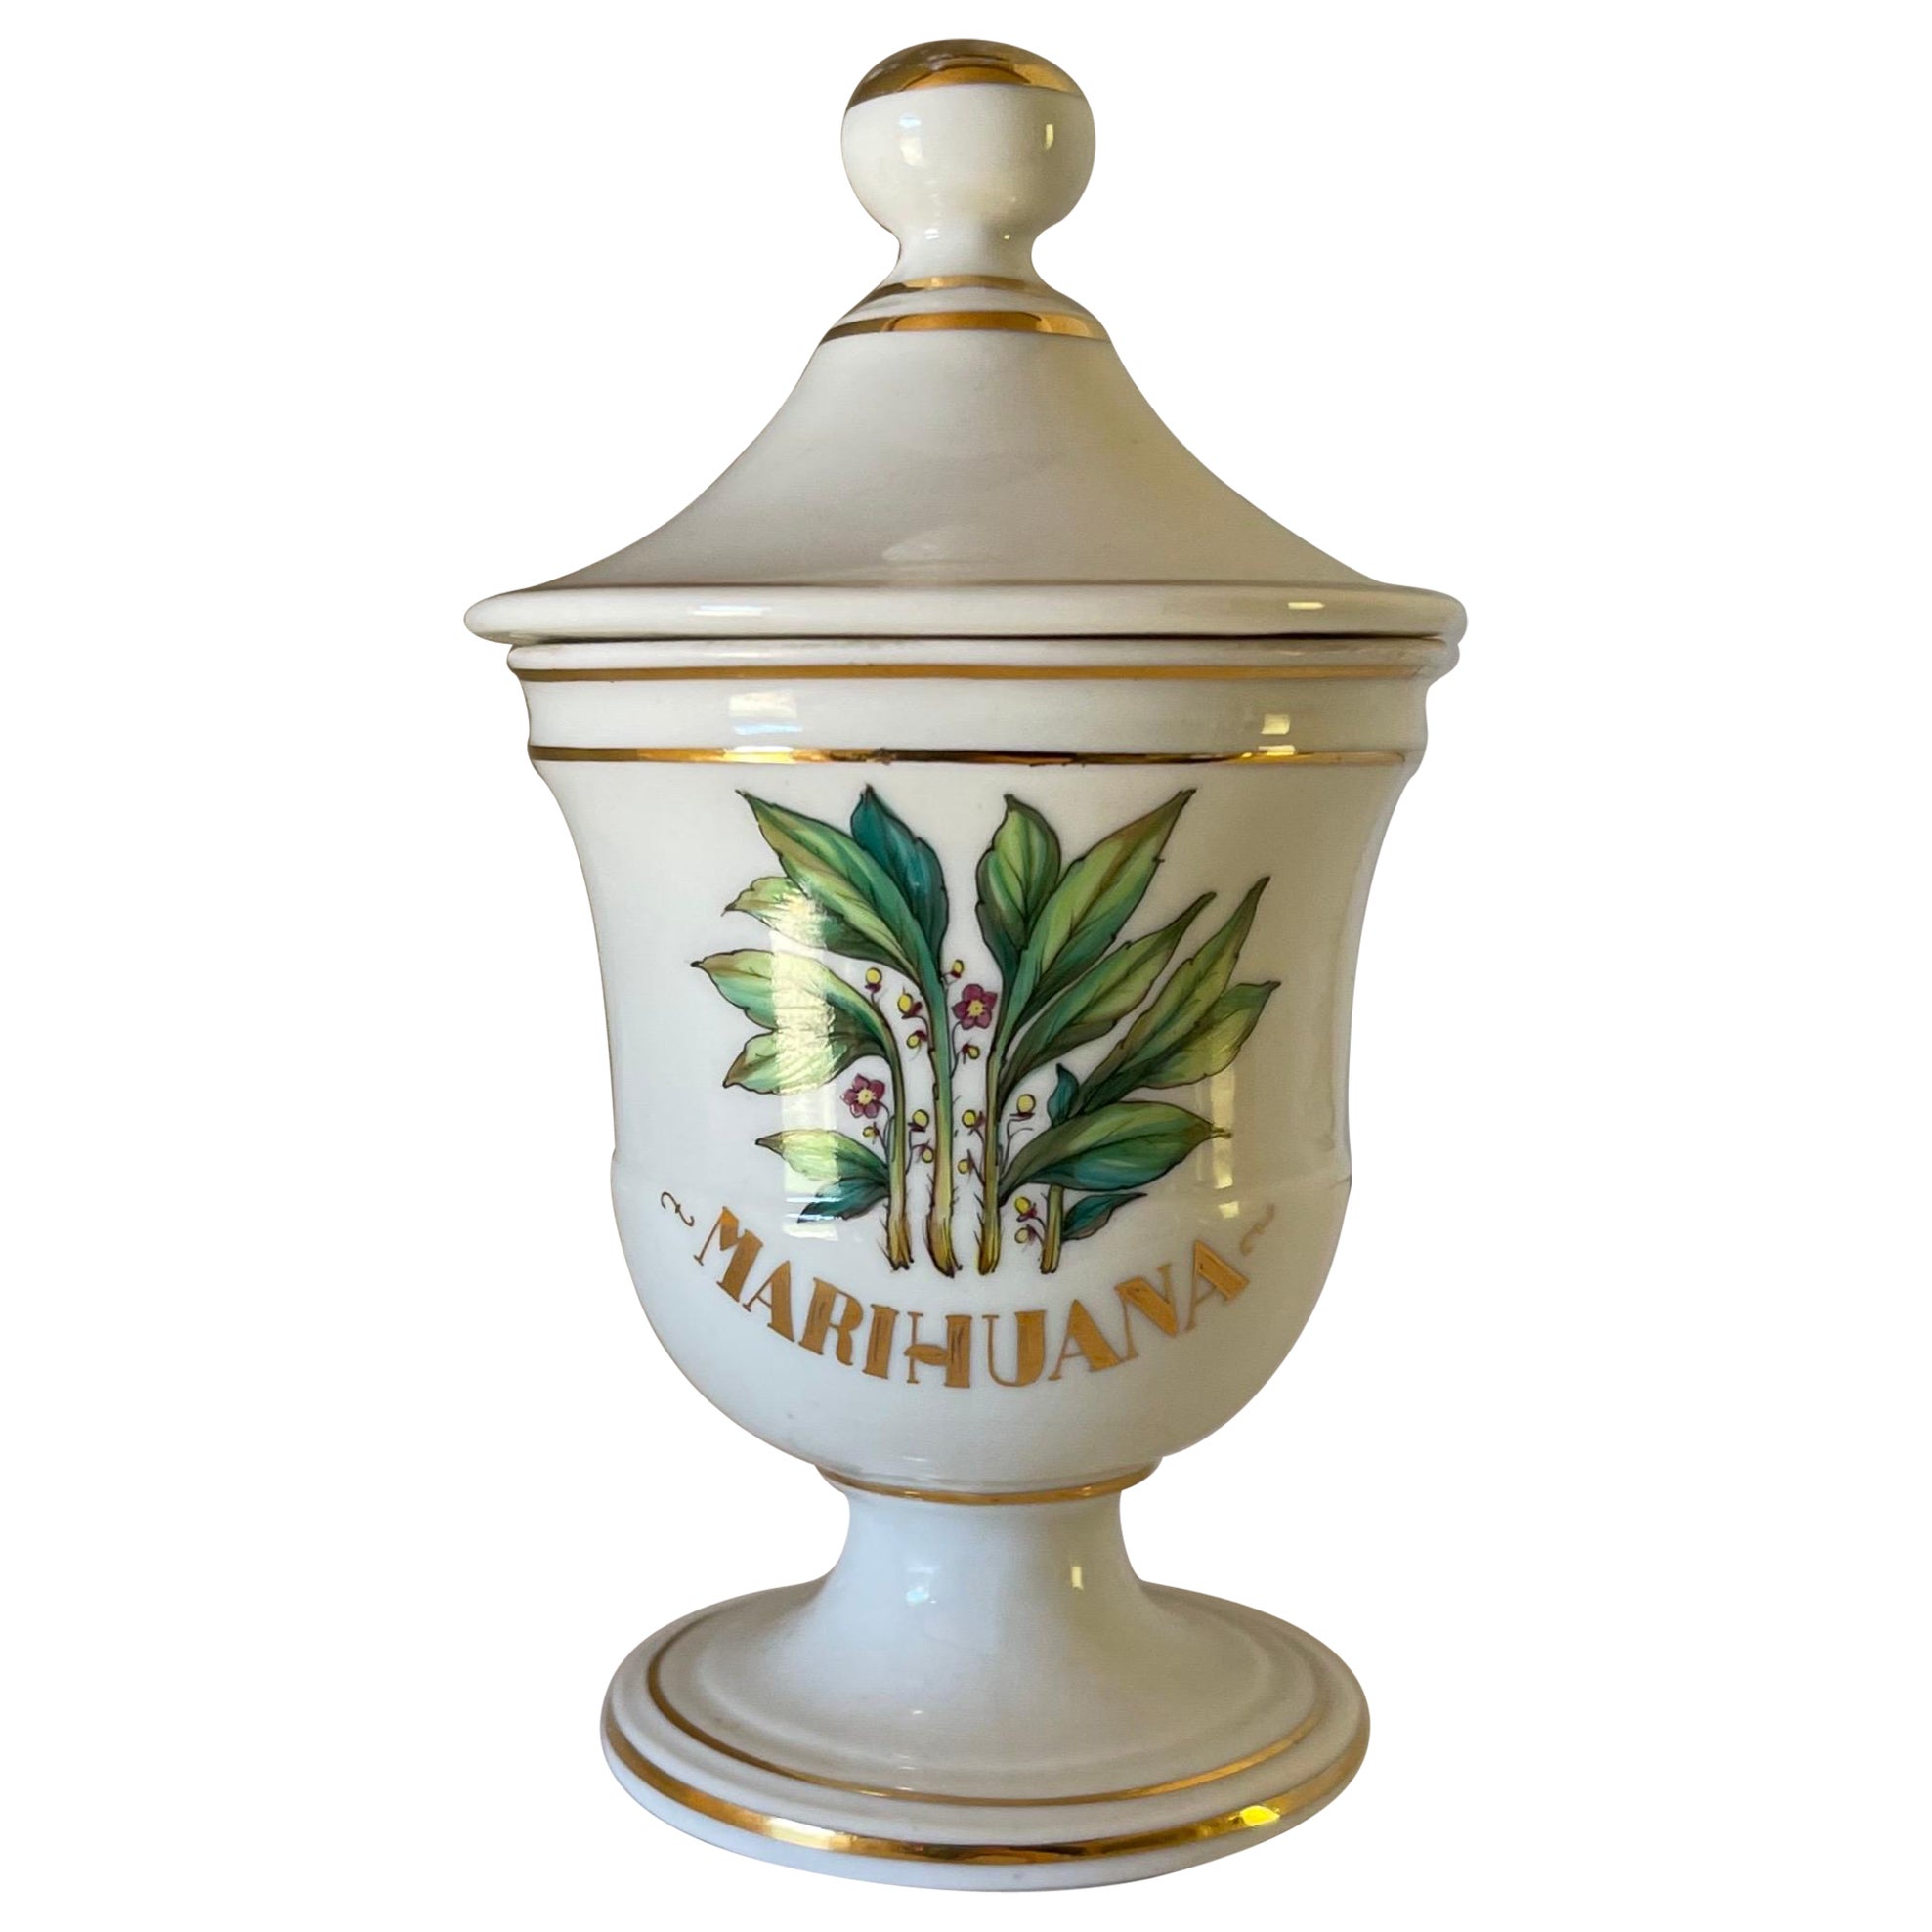 Limoges Marihuana Gold Rimmed Apothecary Jar For Sale